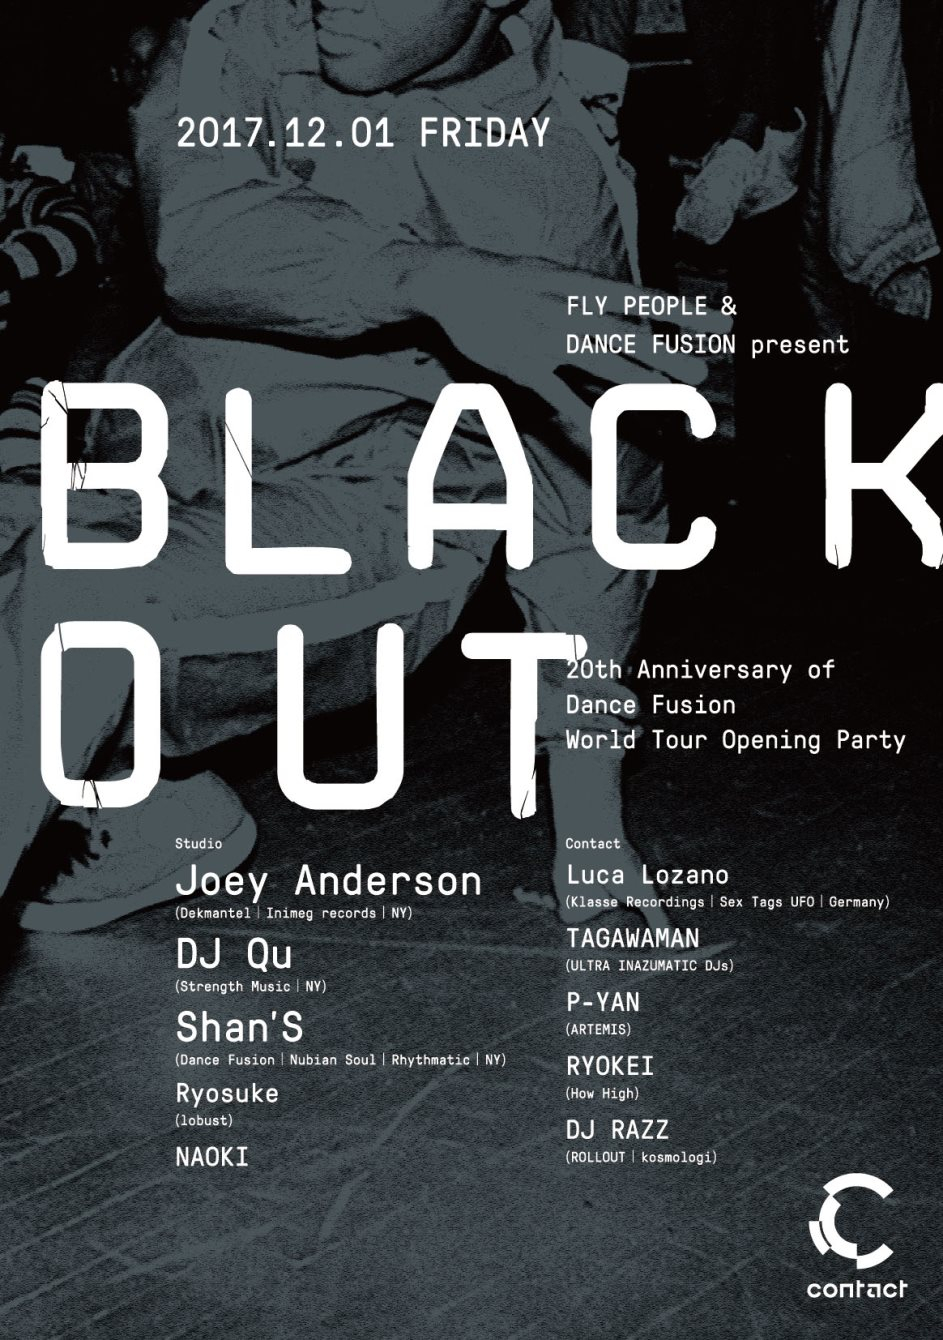 FLY People & Dance Fusion present “BLACK OUT” - Flyer front